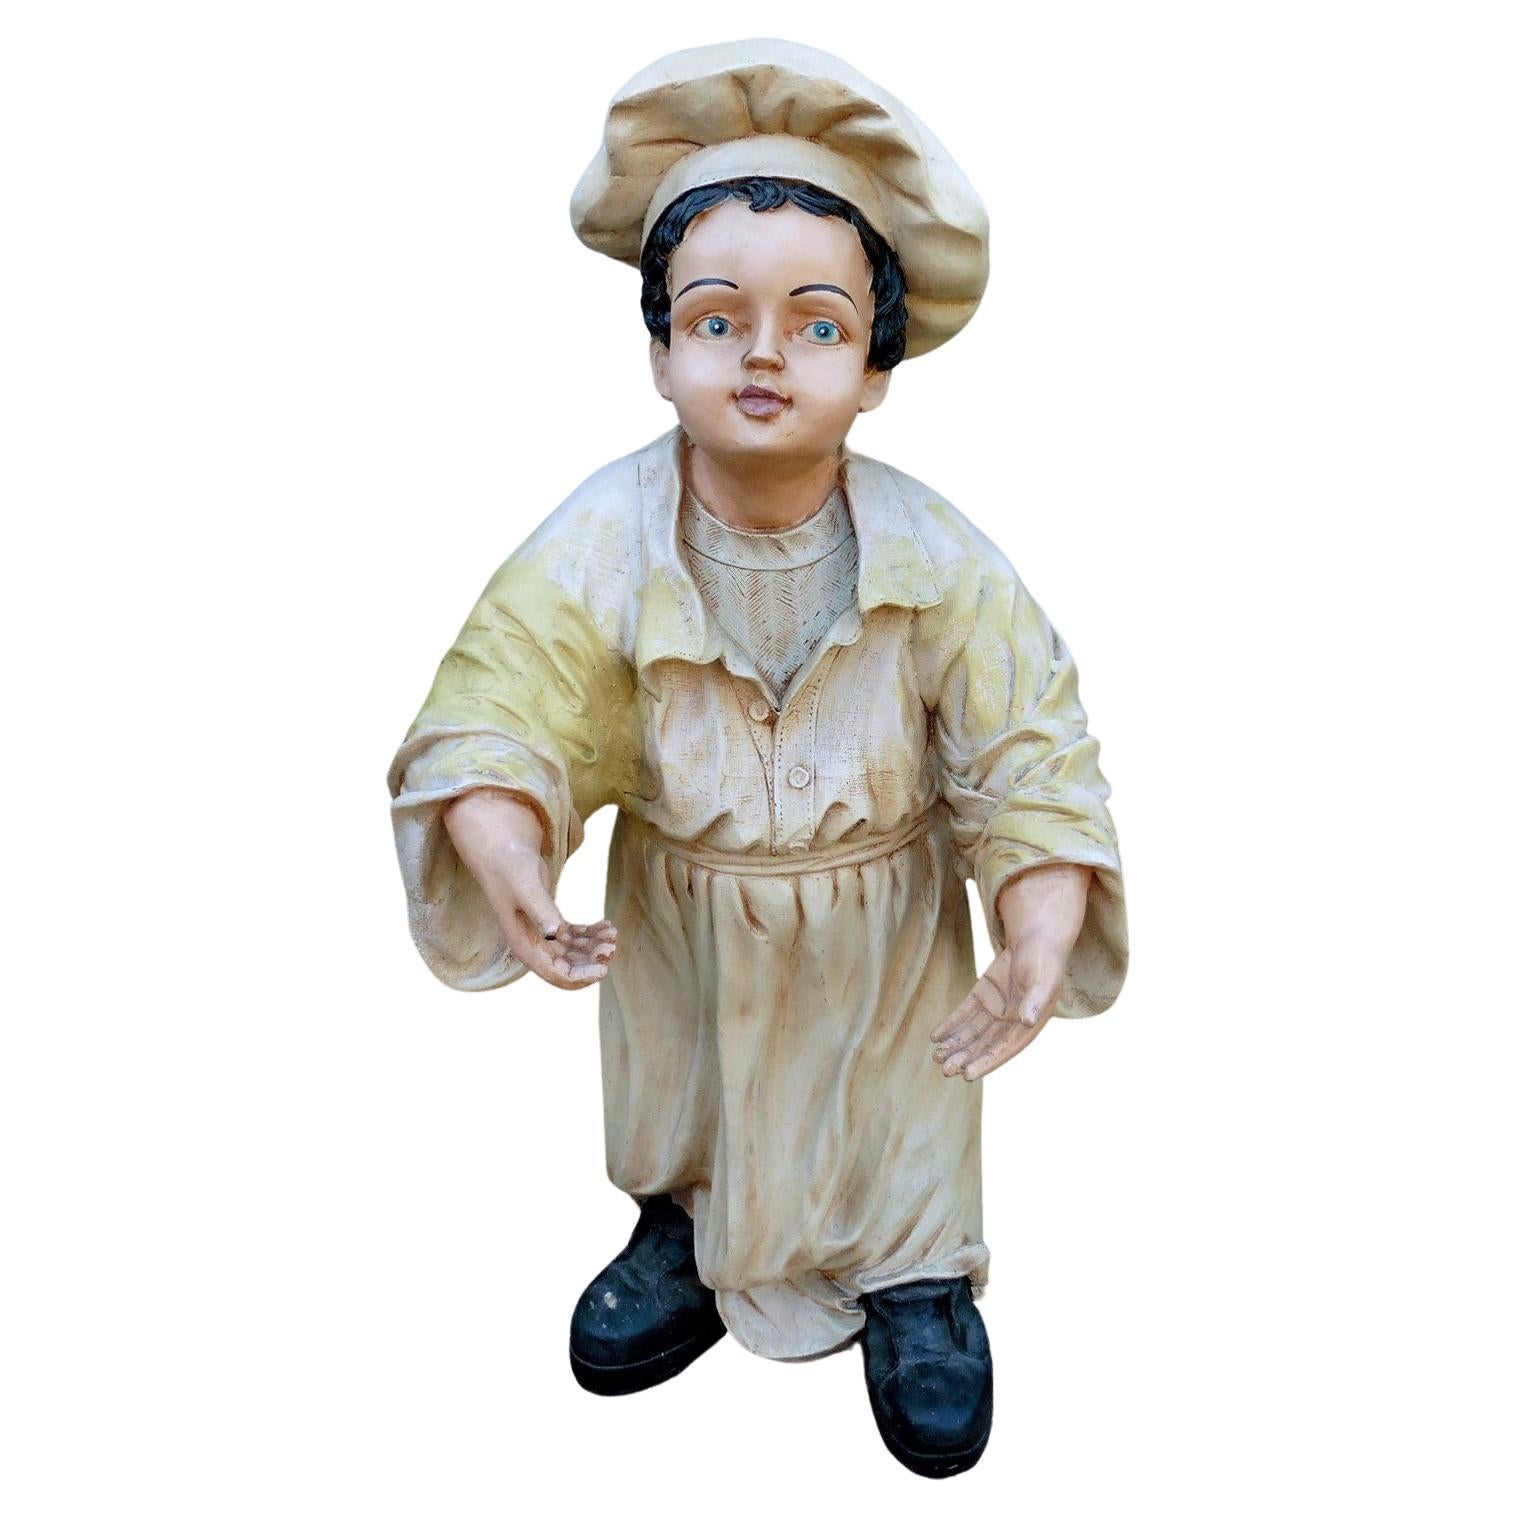 1920s French Patisserie Advertising Figure, Character Doll